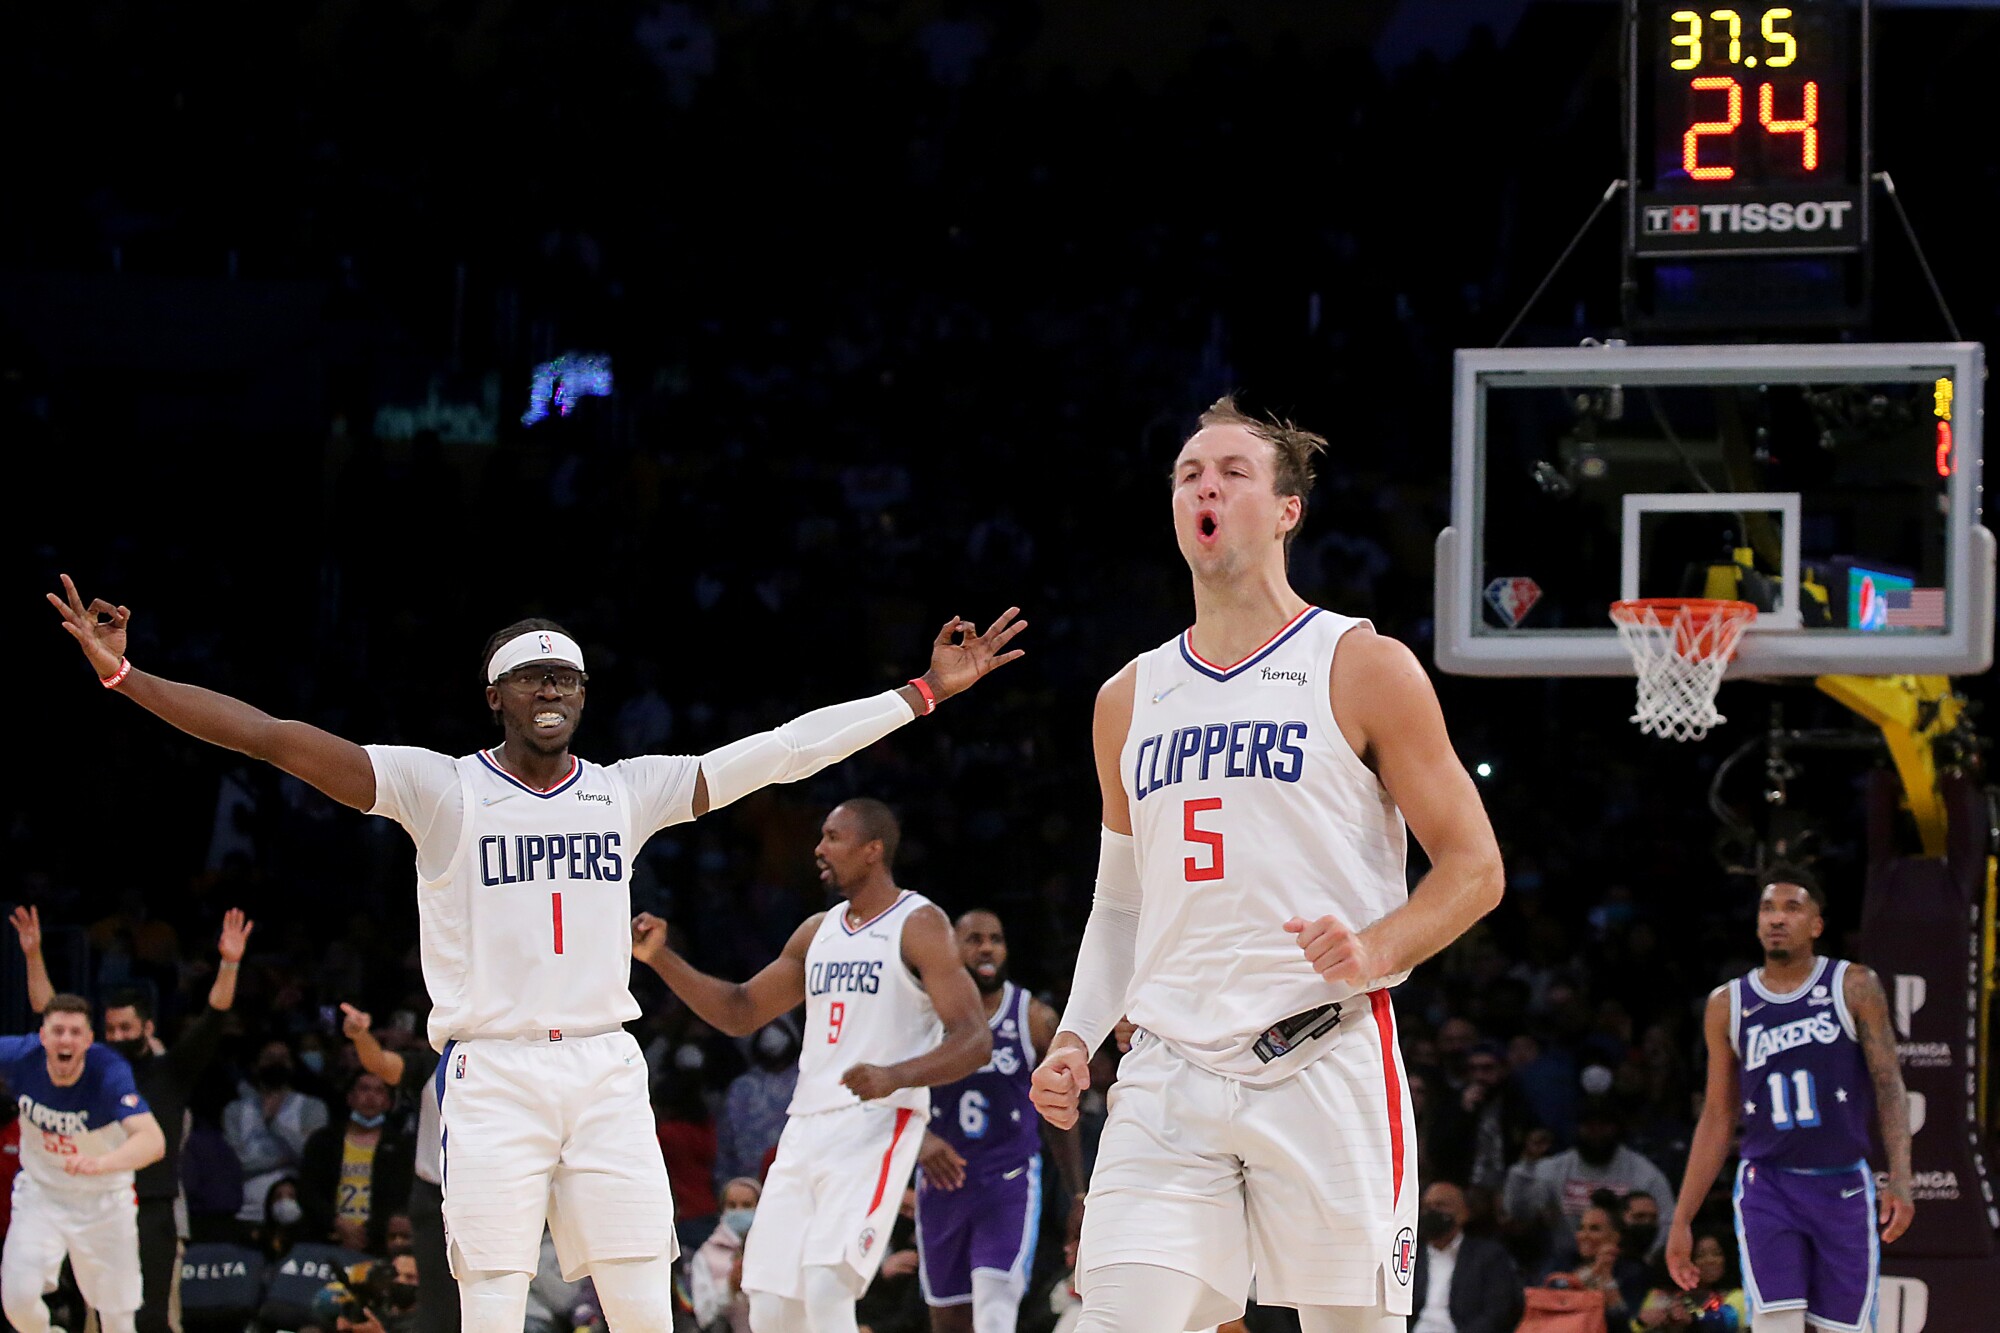 Clippers guard Luke Kennard celebrates after hitting a three-pointer.